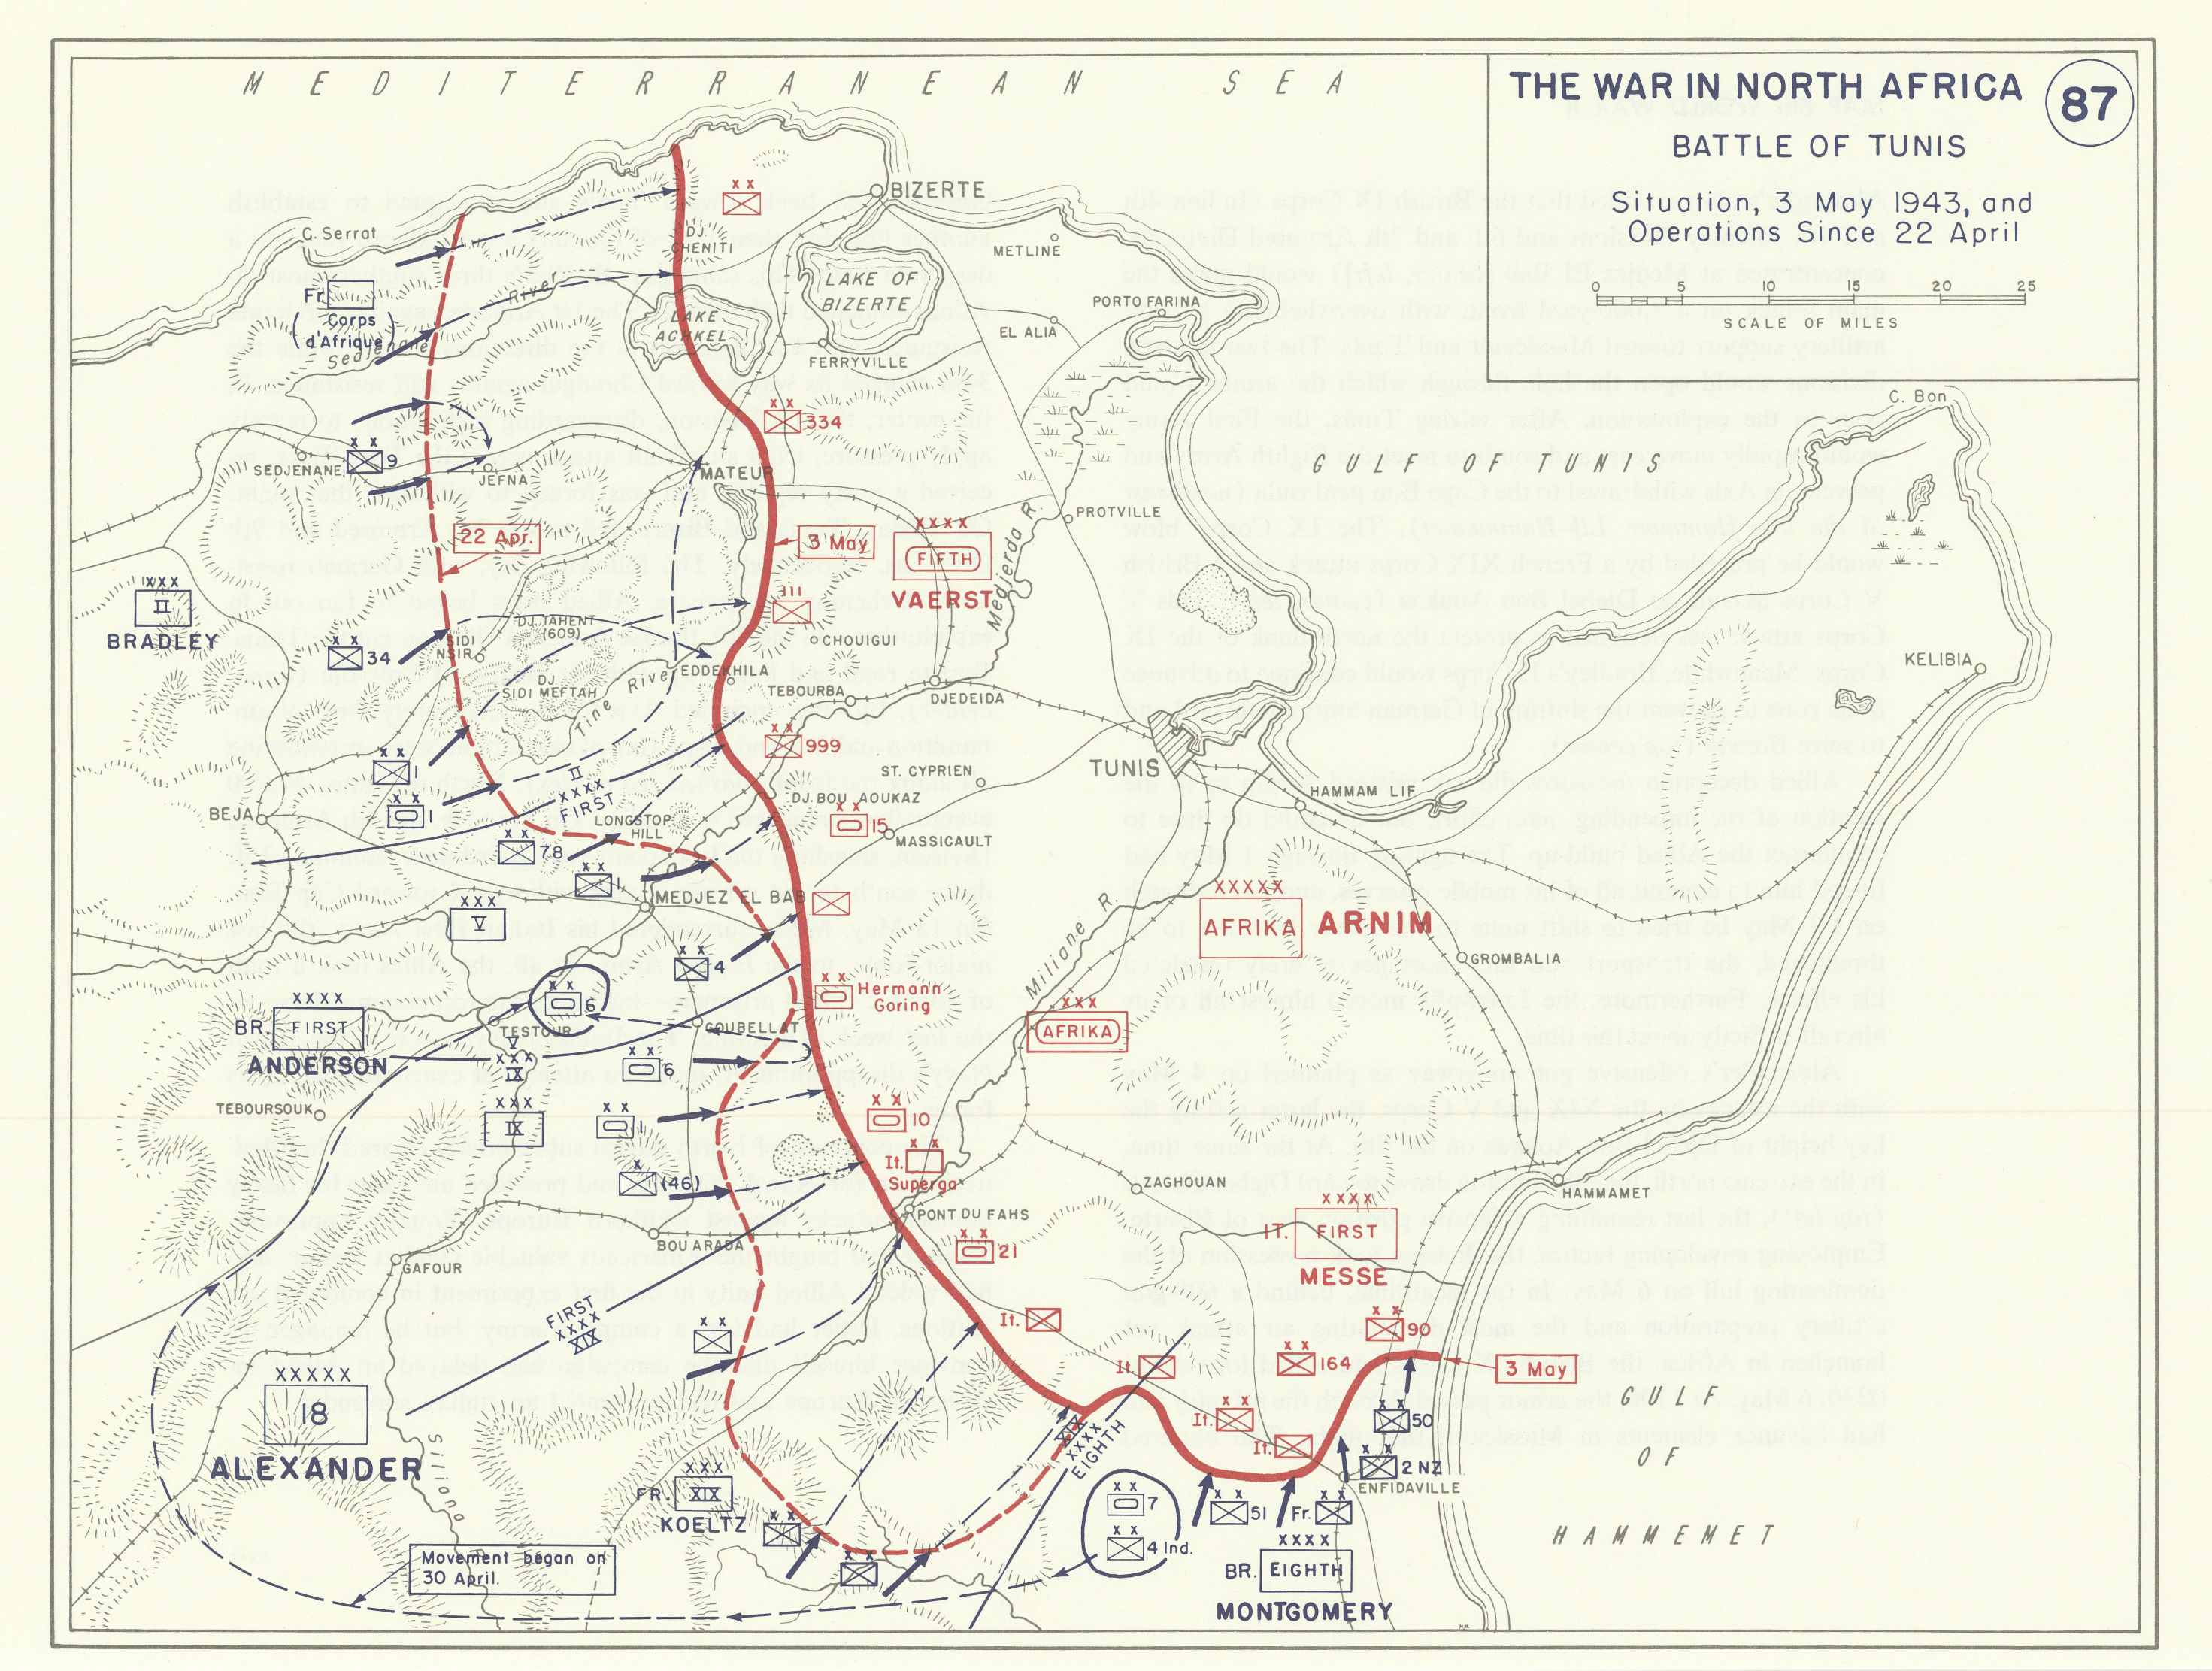 World War 2. North Africa. 22 April-3 May 1943. Battle of Tunis 1959 old map